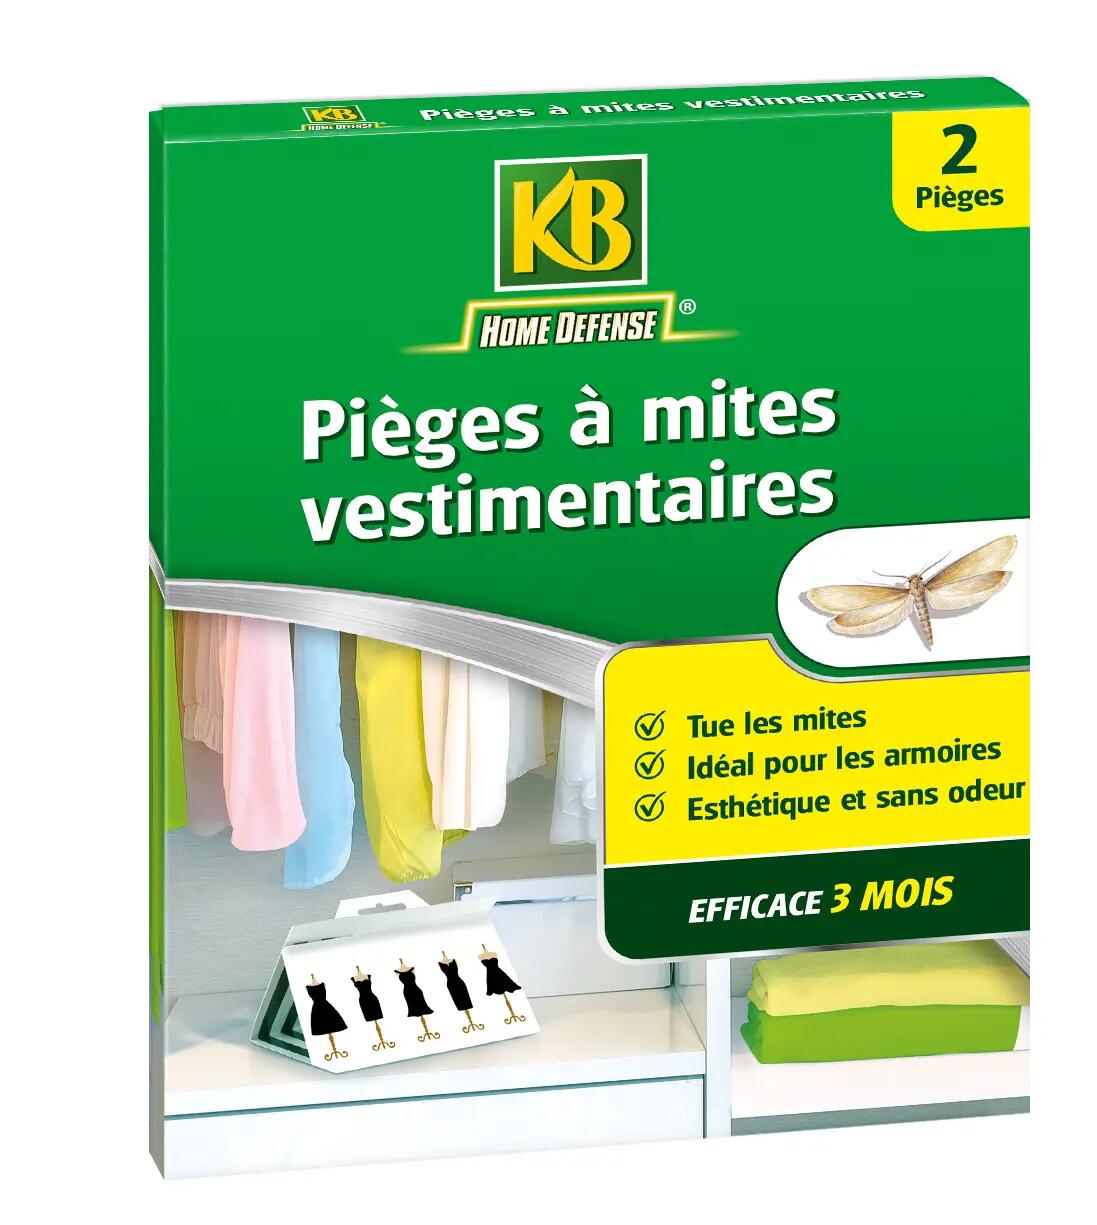 Piège stickers à mouches sans insecticide - Protect Expert